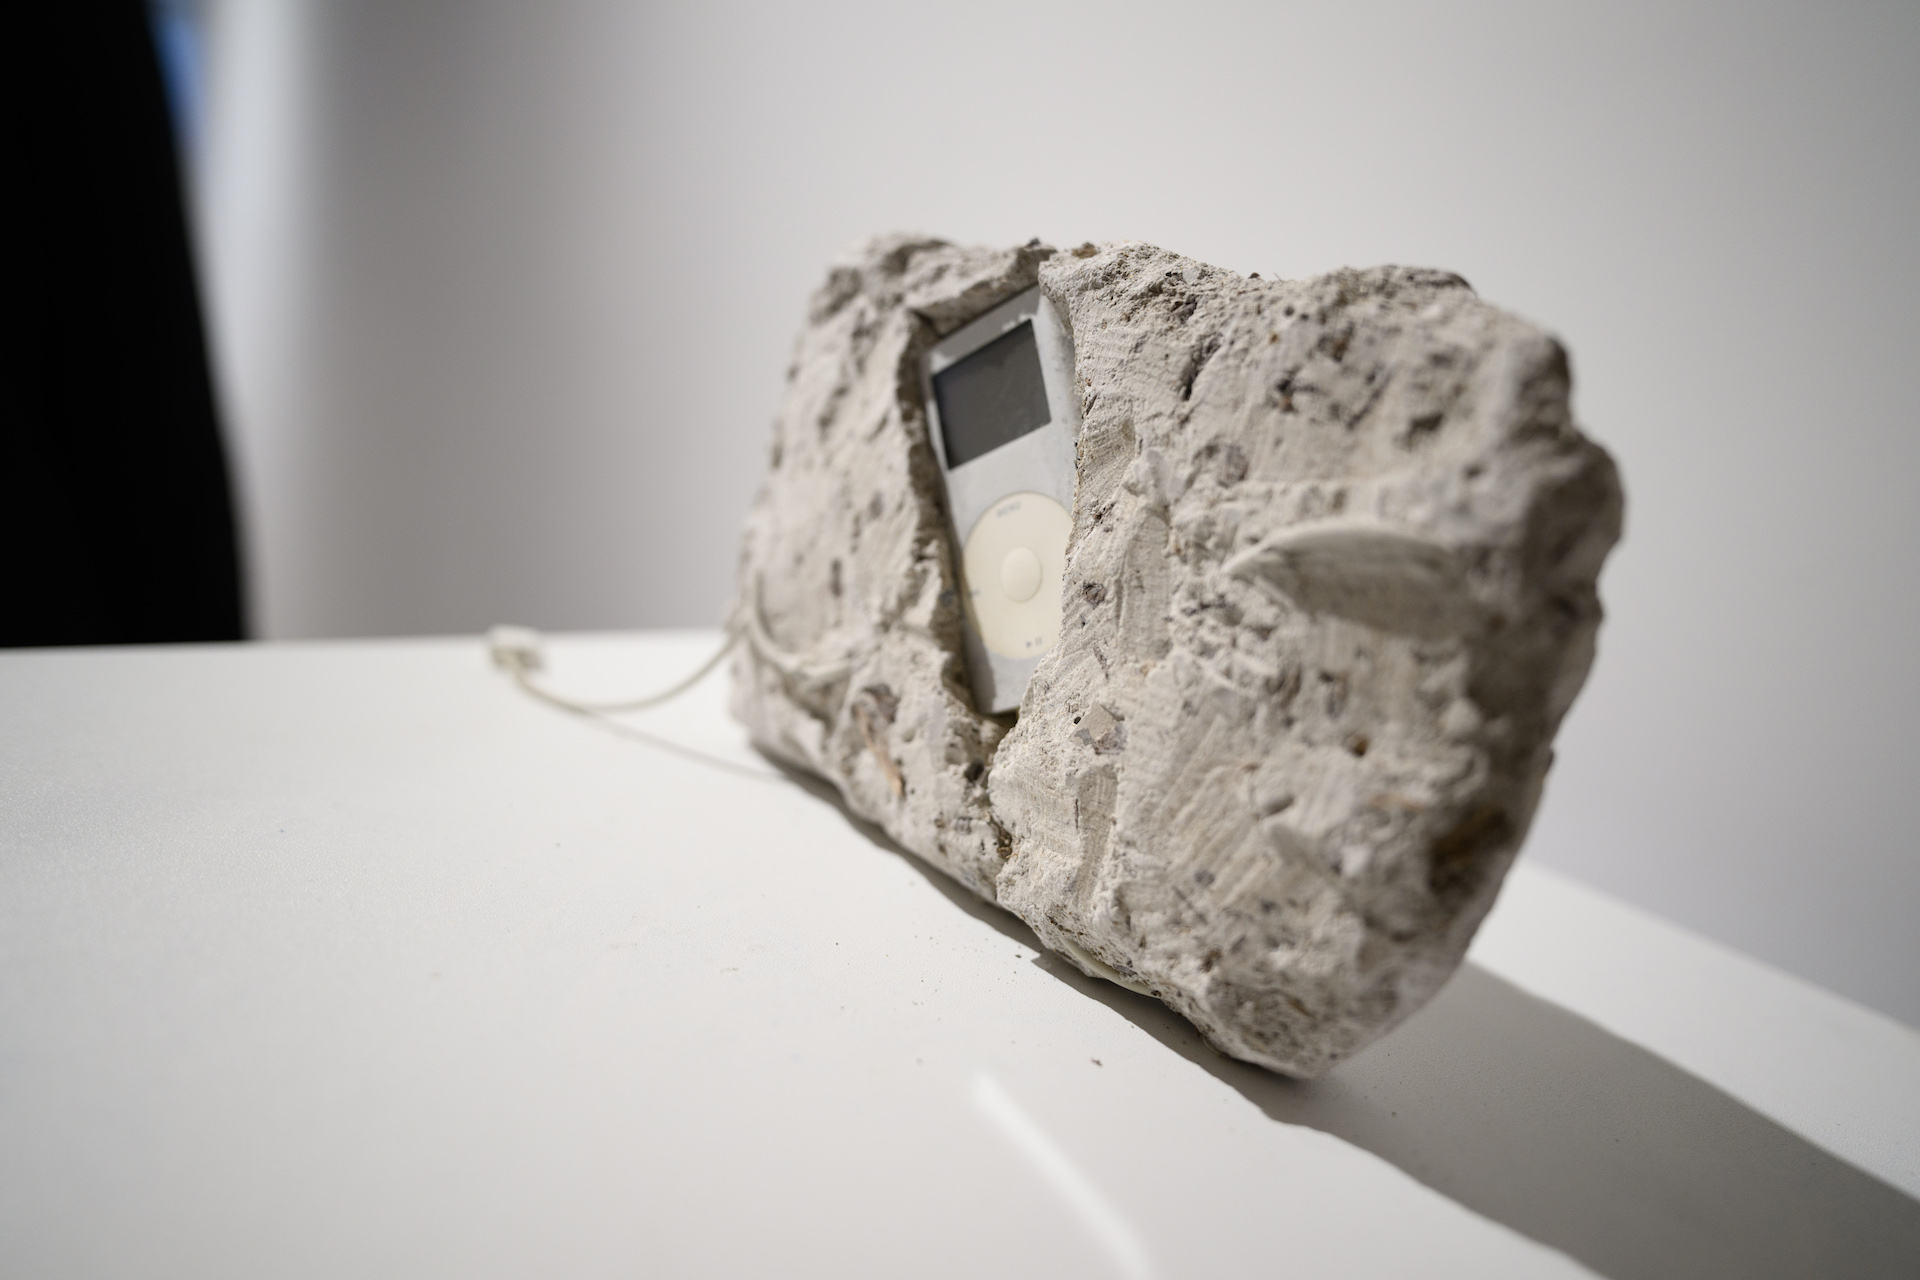 IPod covered in concrete